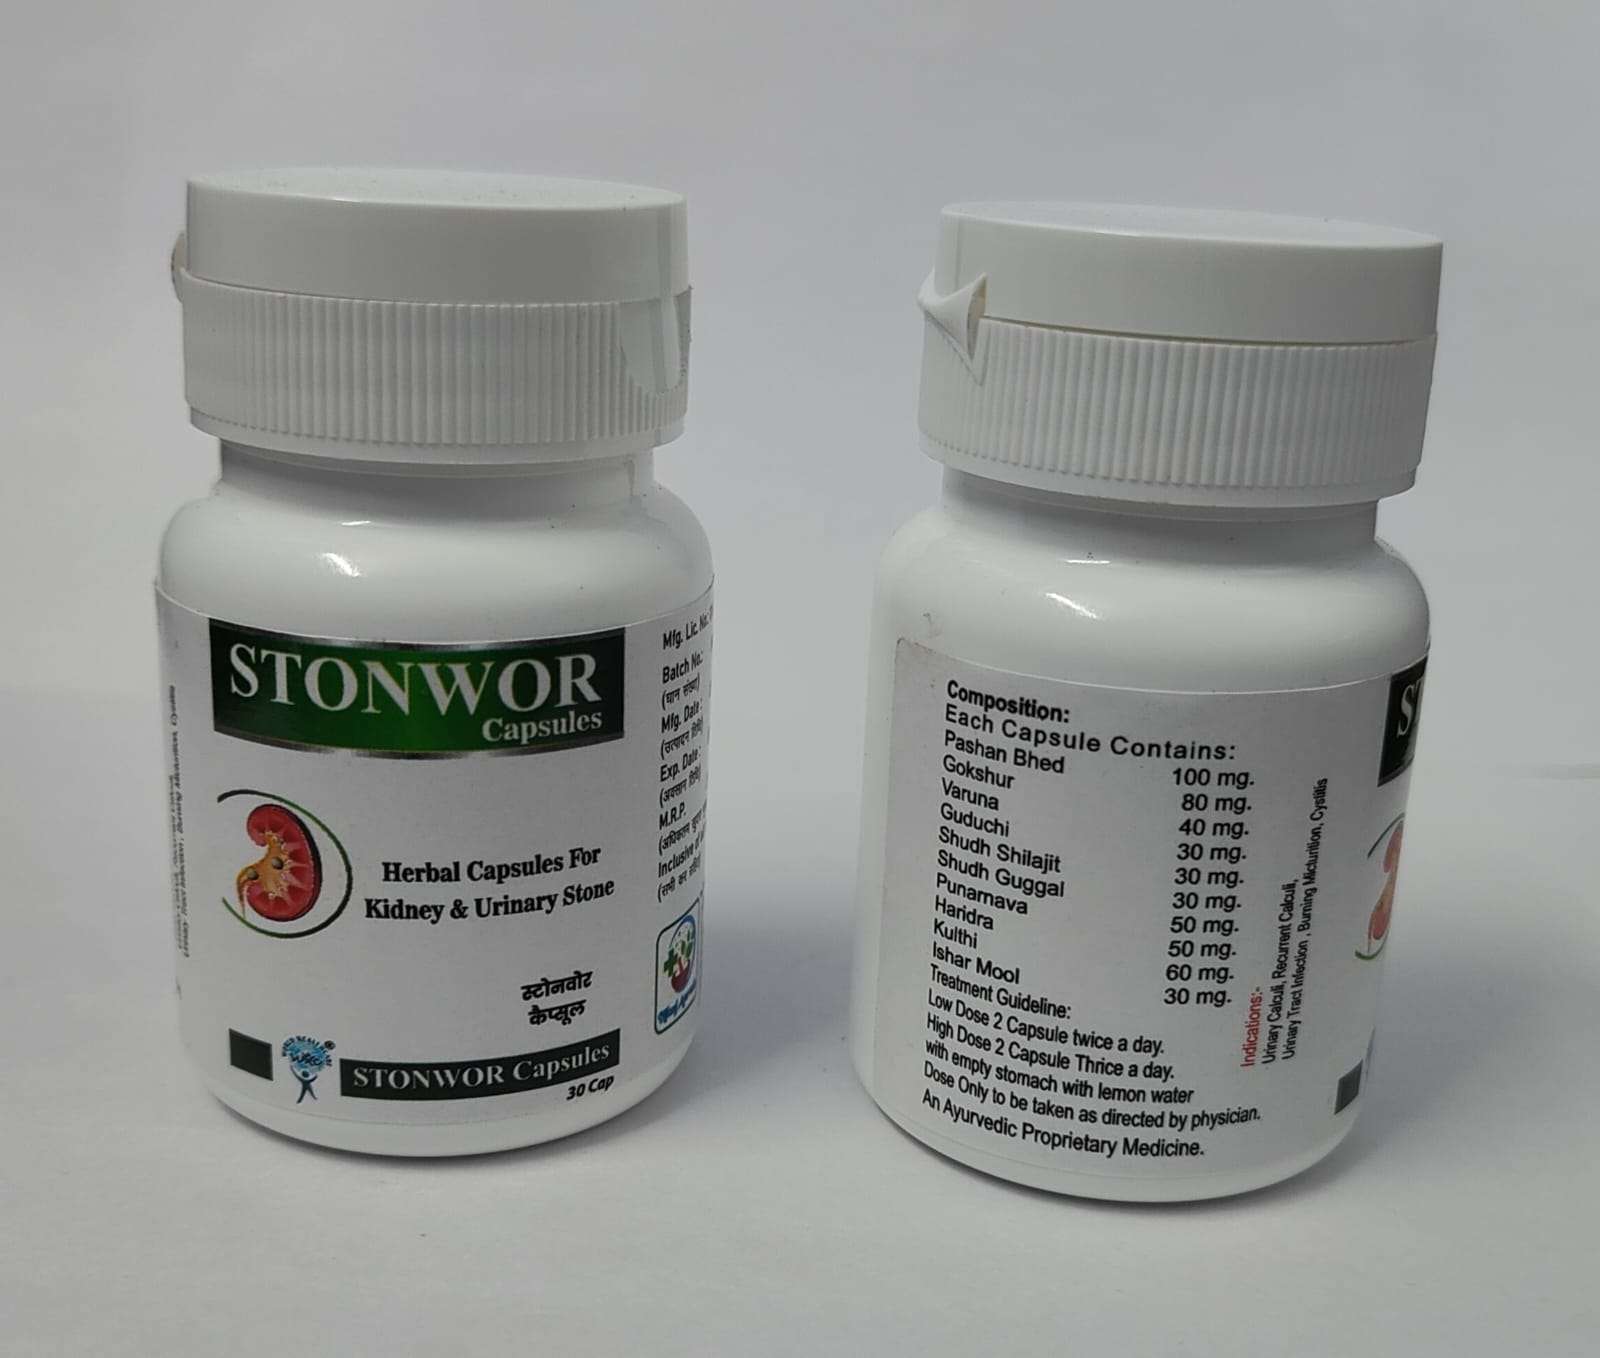 capsules for kidney & urinary stone